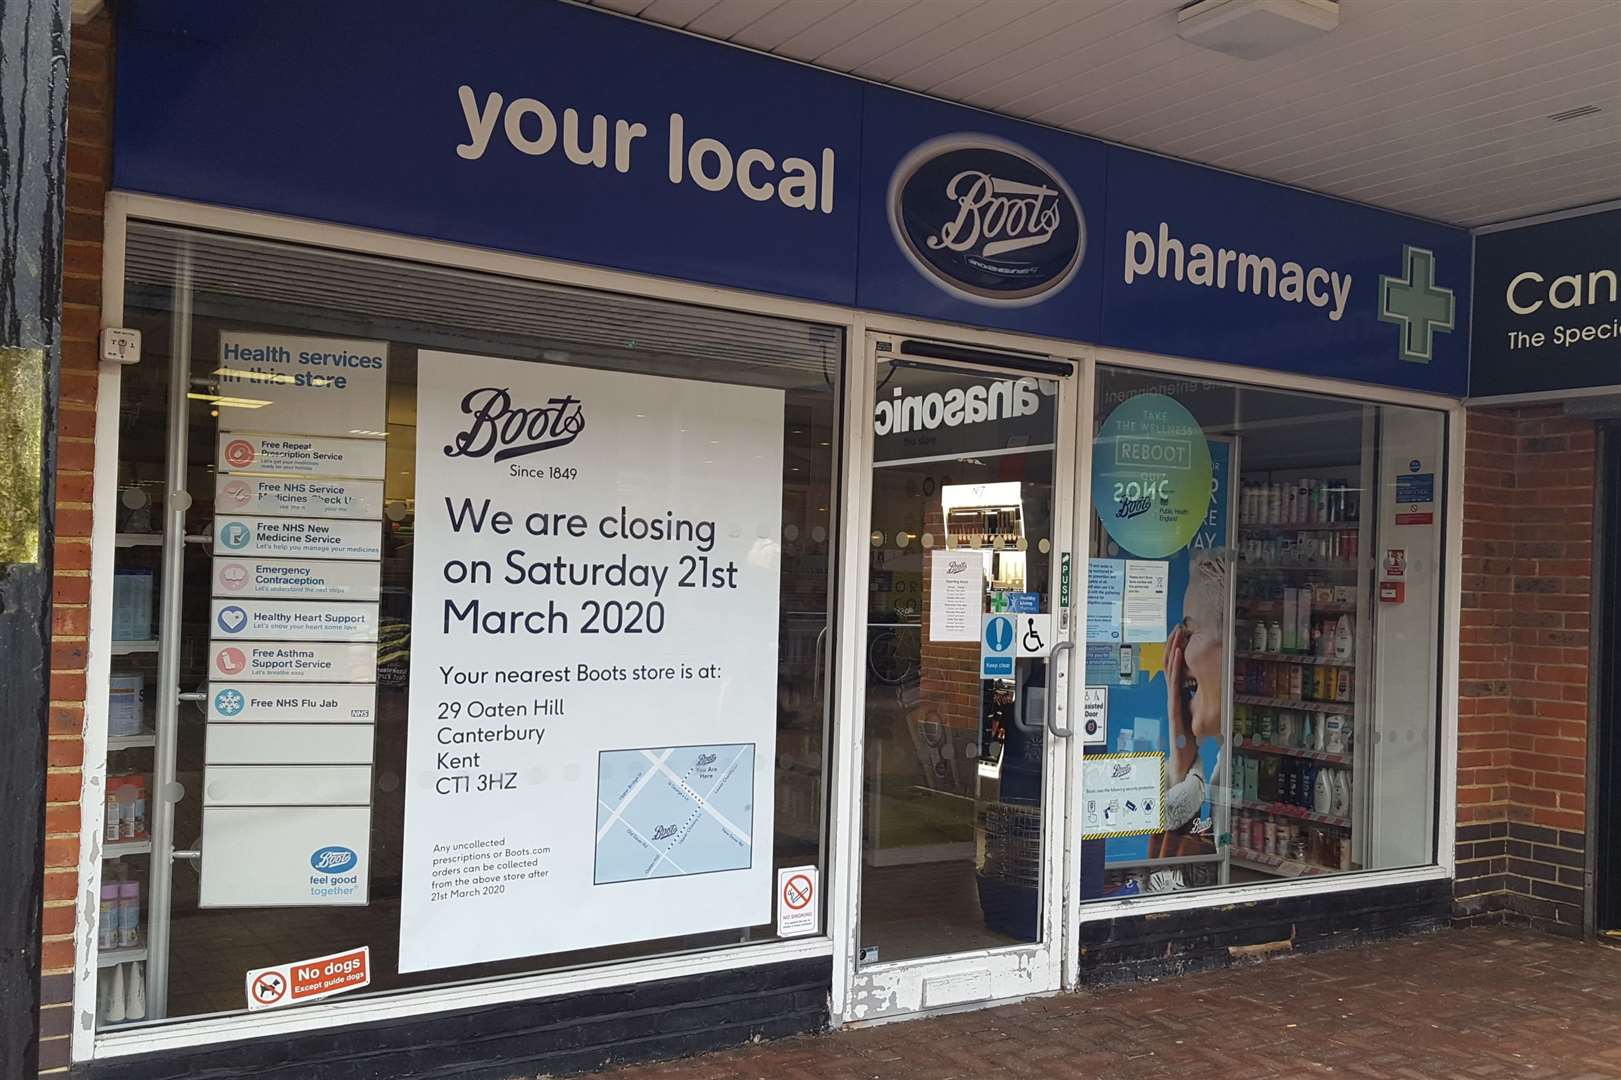 Boots in St George's Centre, Canterbury, is closing